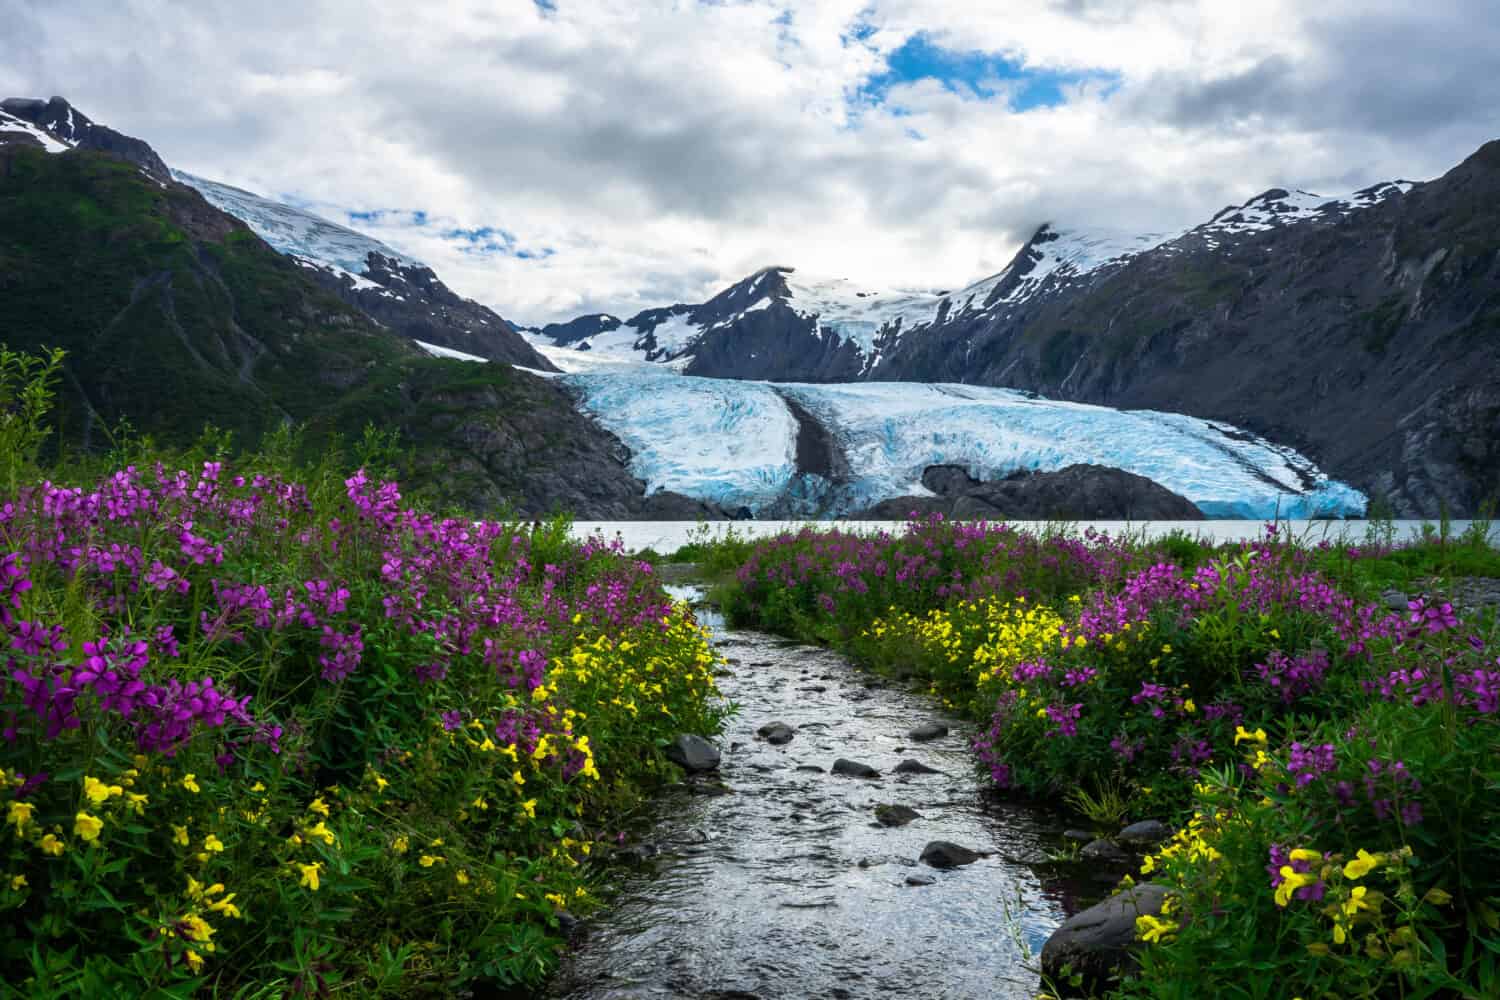 Alaska Portage glacier and Portage lake in the Chugach mountains with pink blooming fireweed on the foreground. Shot in the USA, Alaska, in summer 2020